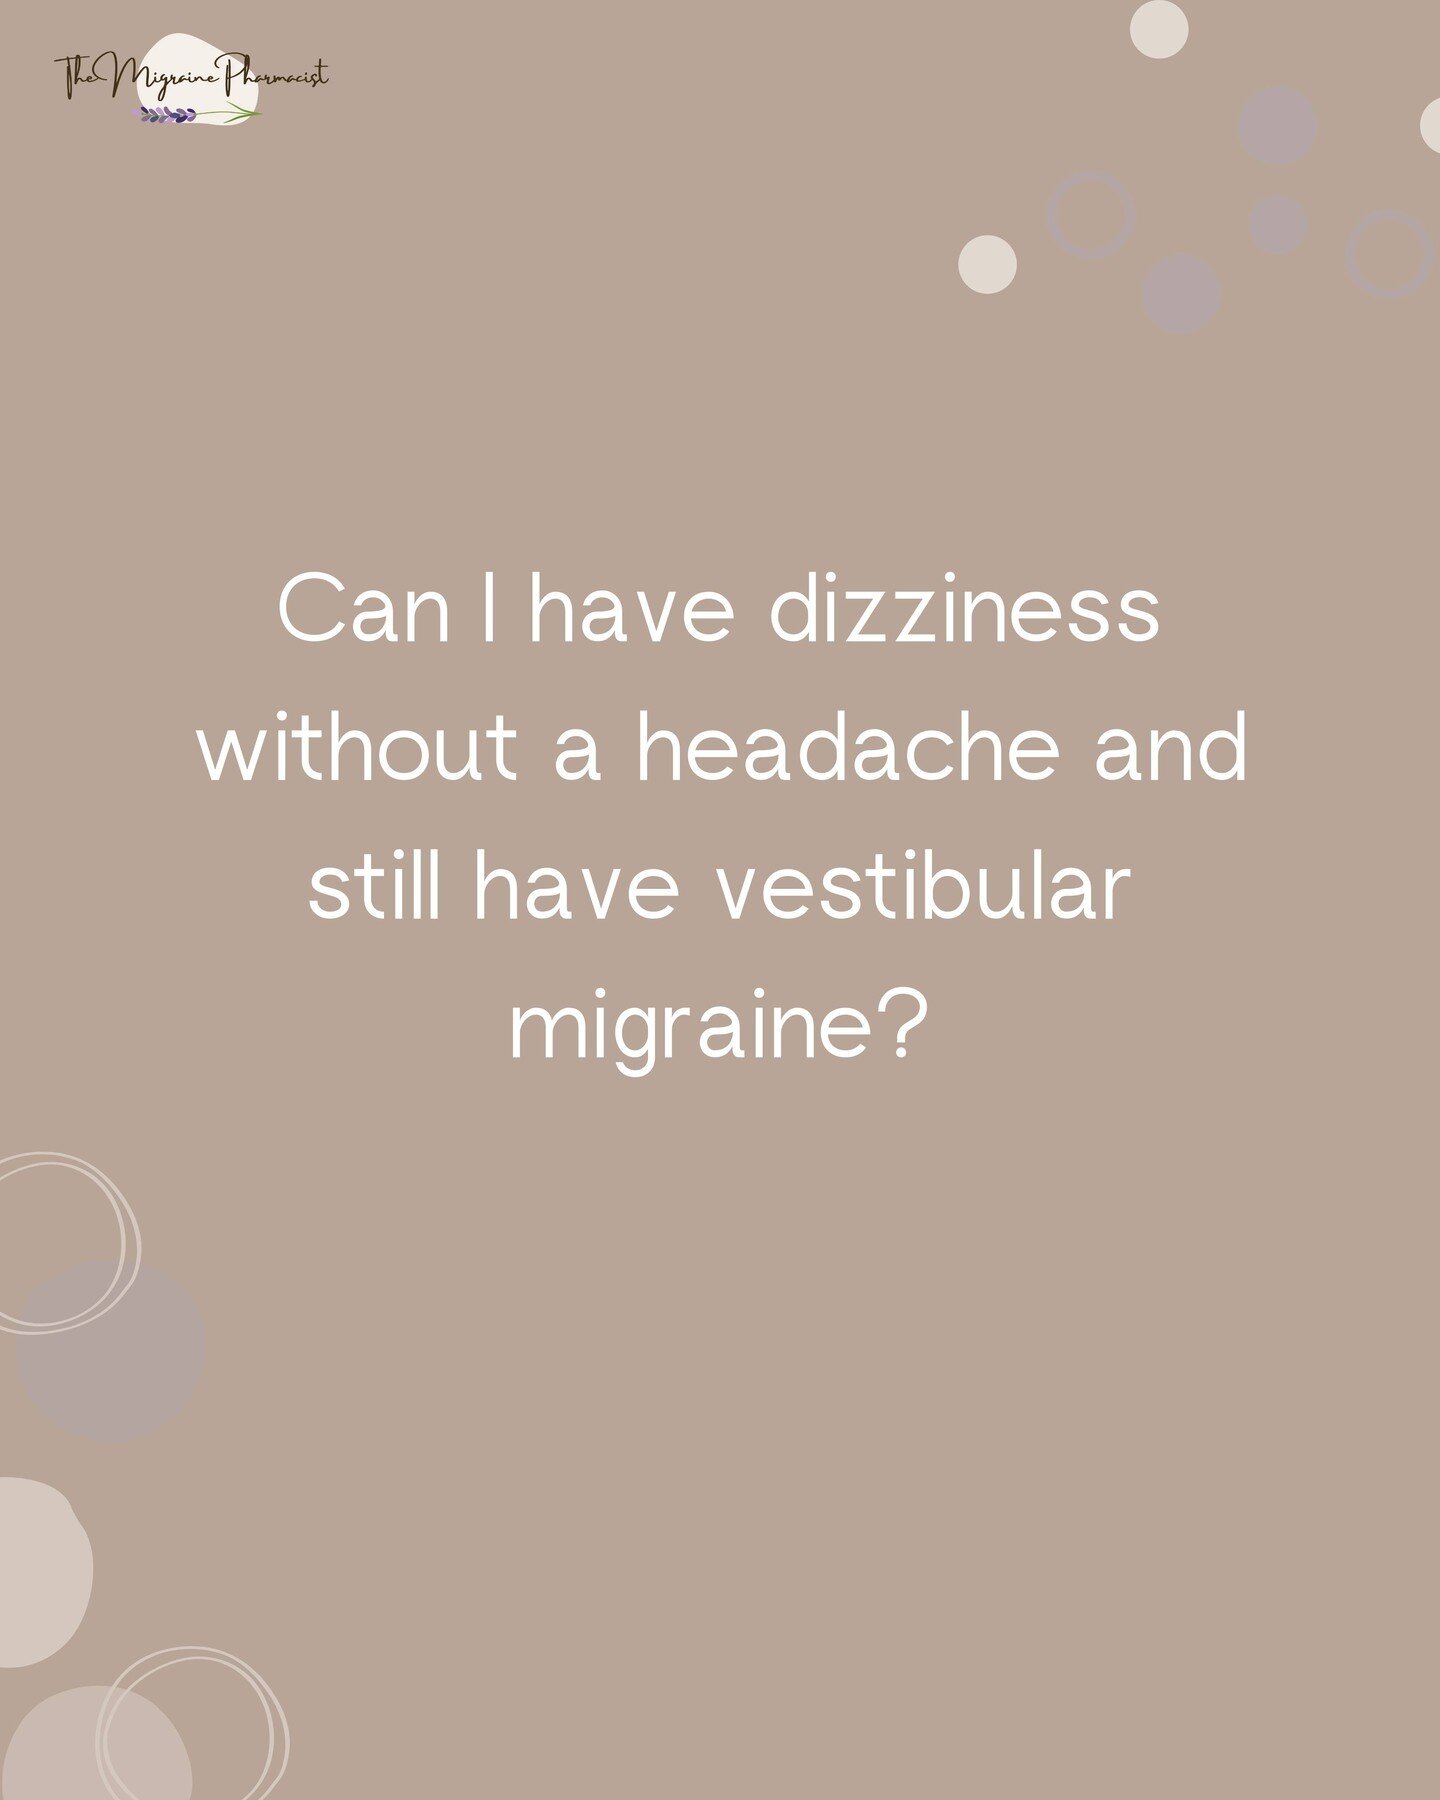 People living with migraine report many symptoms, making this type of migraine more difficult to diagnose and be treated effectively.

 &quot;Although subjective hearing symptoms (ringing, fullness, pressure in one or both ears) are common, significa